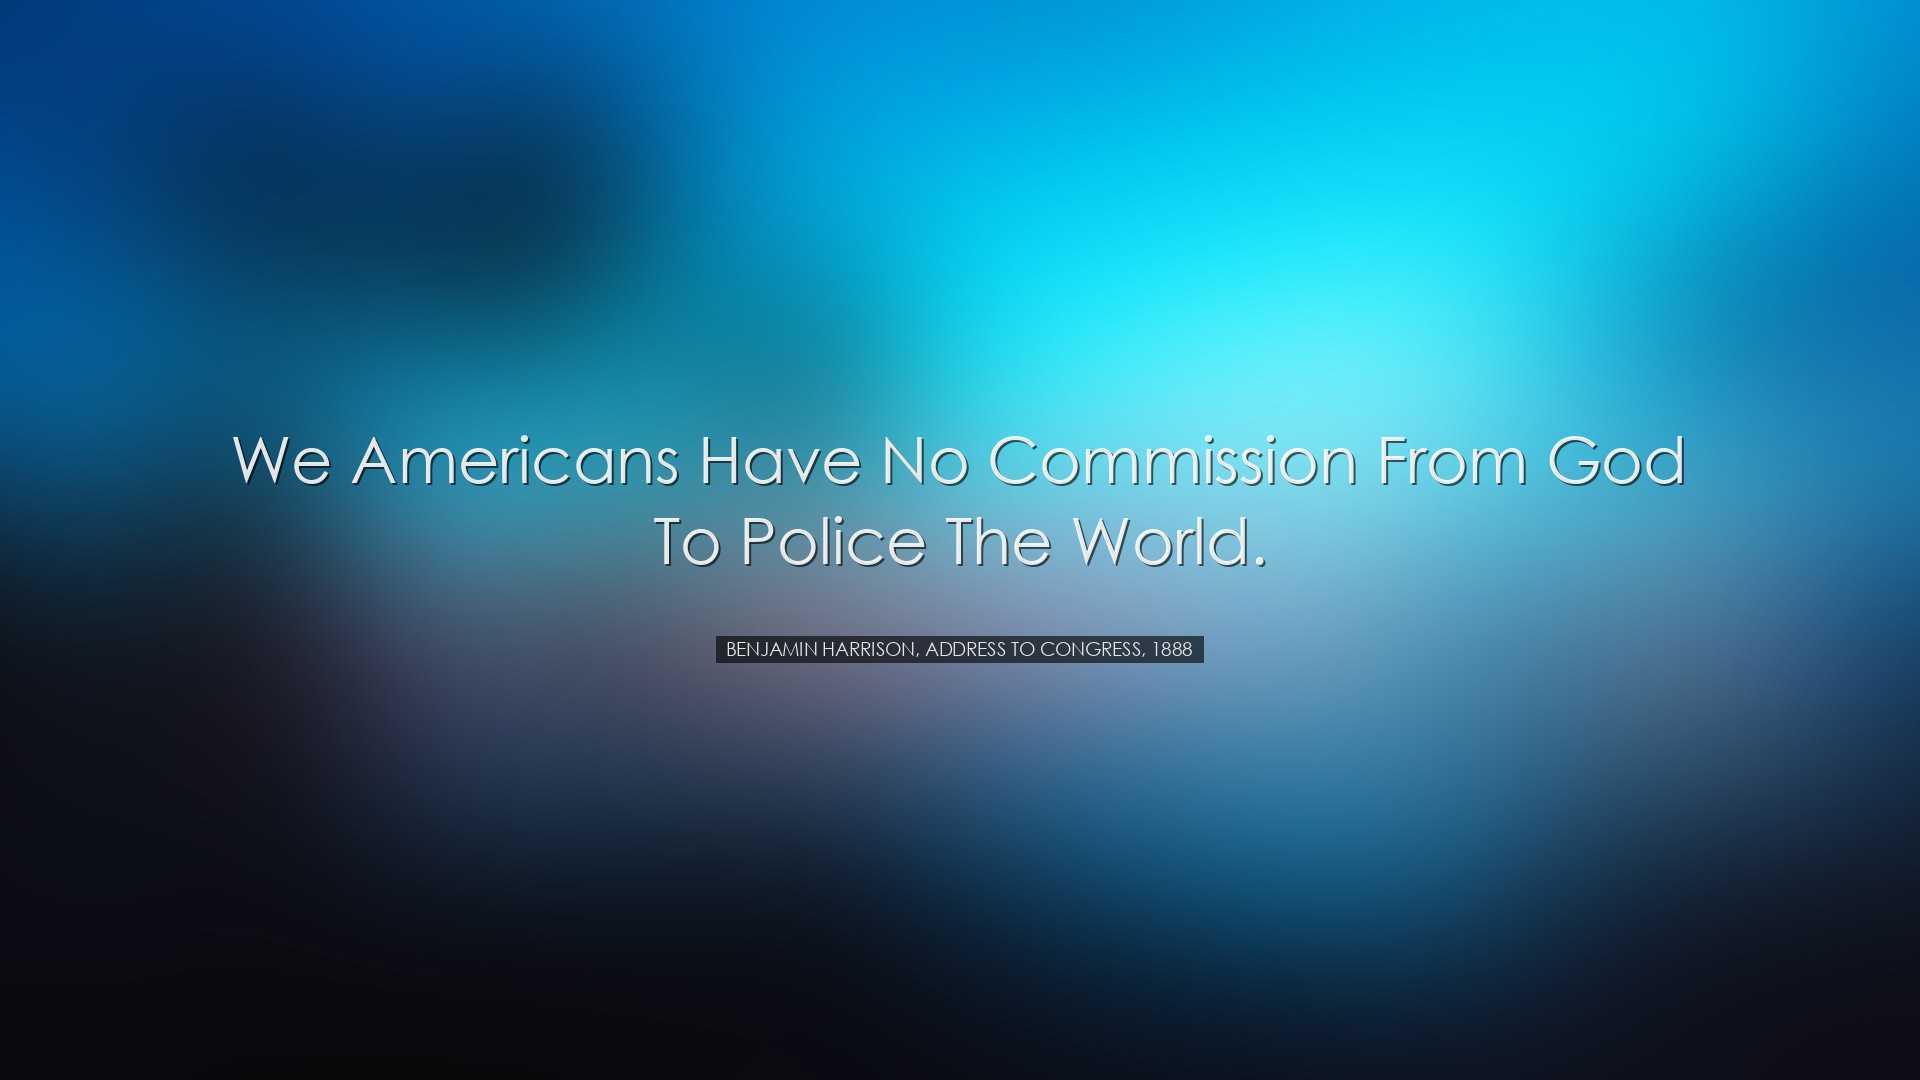 We Americans have no commission from God to police the world. - Be